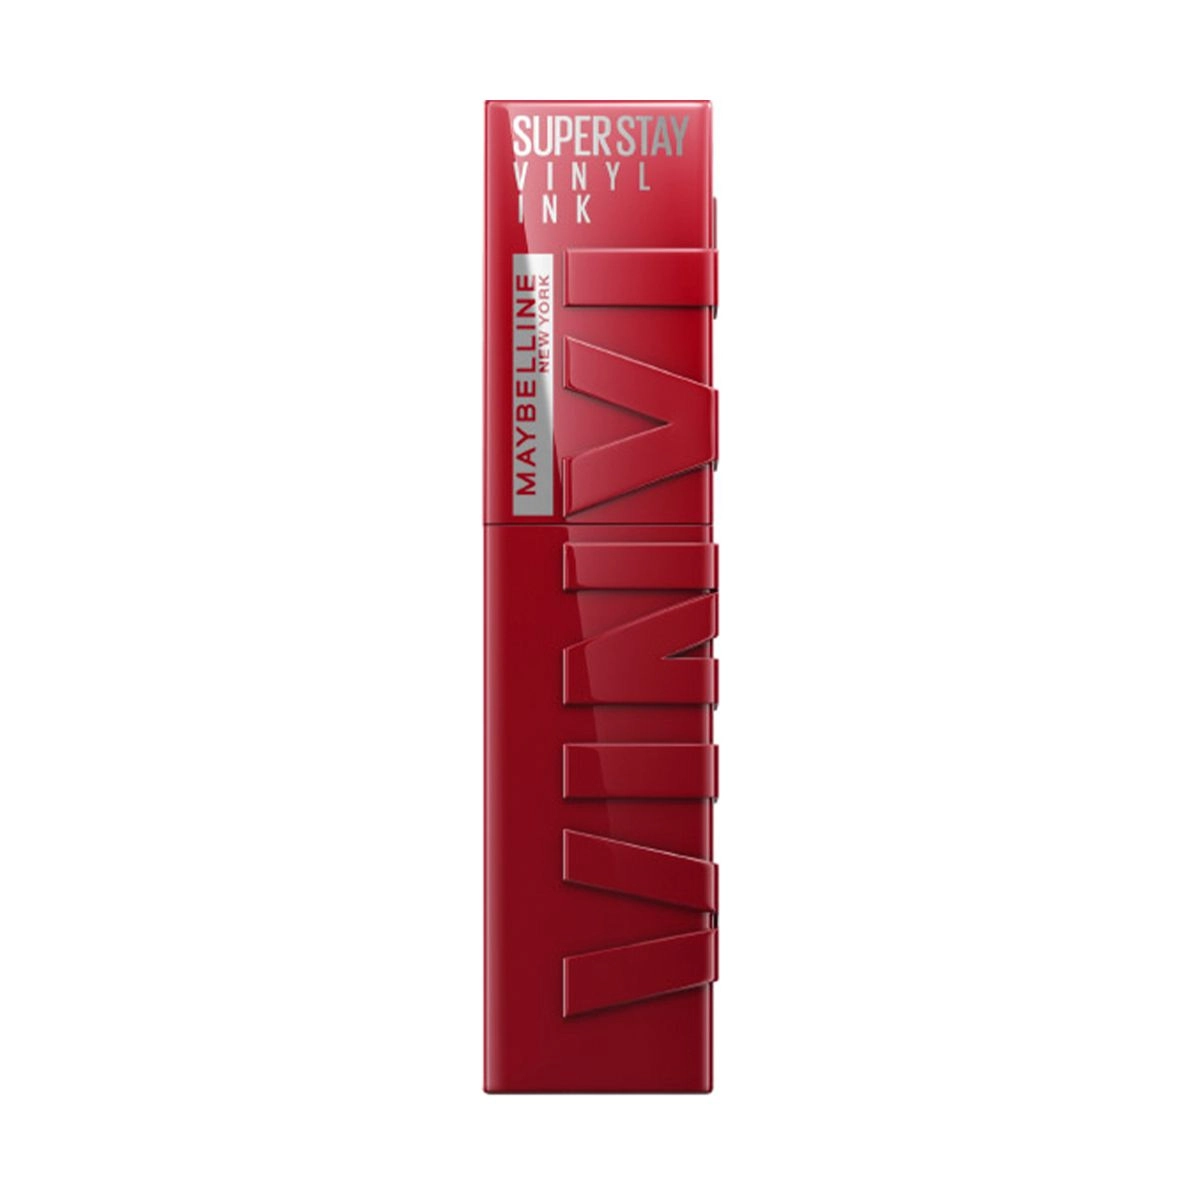  MAYBELLINE LABIAL SUPERSTAY VINYL INK-LIPPY 10 Unid